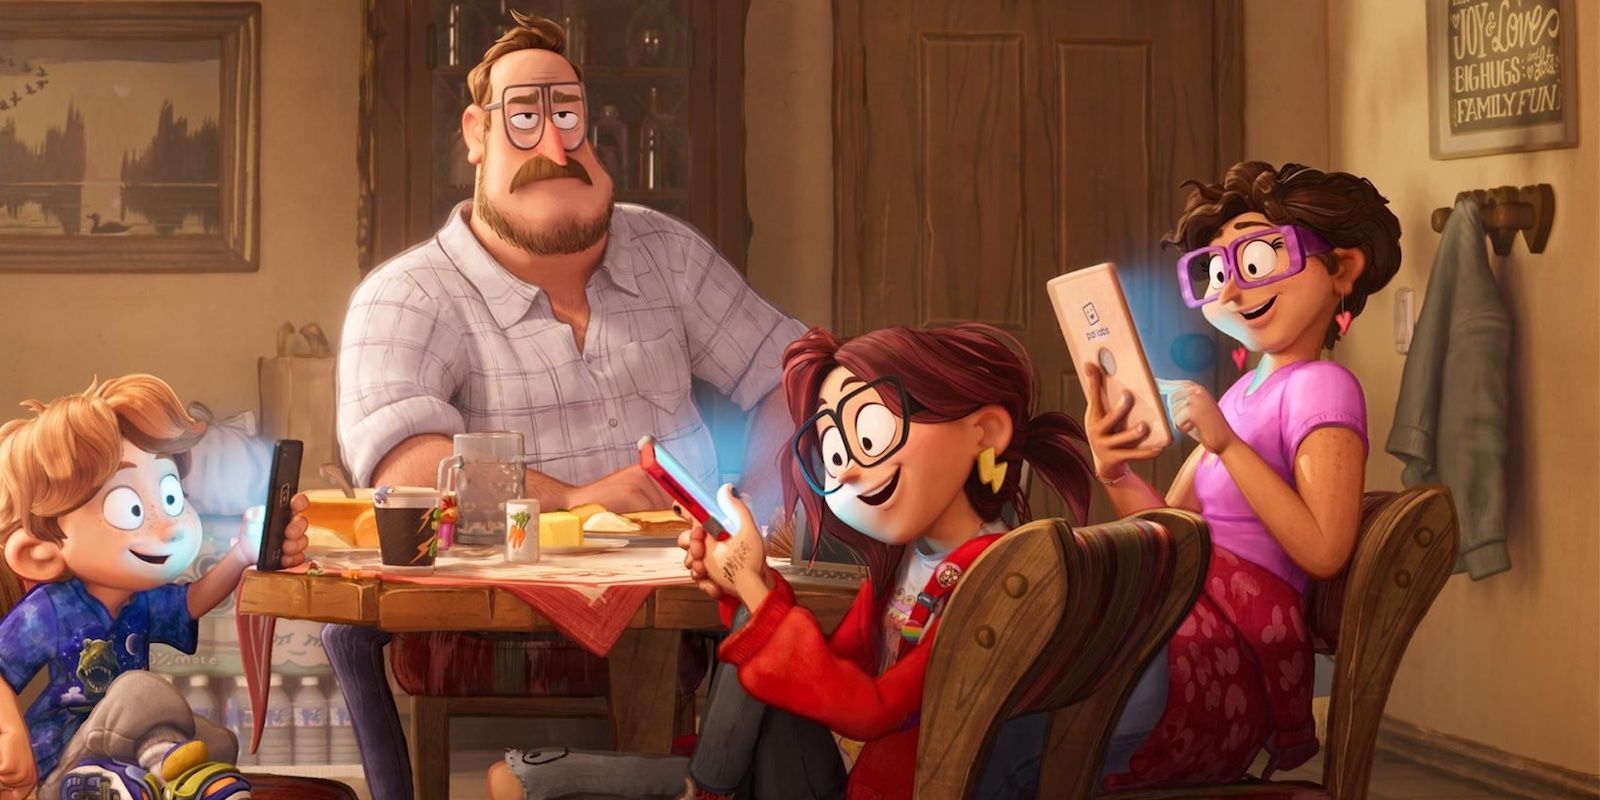 Danny McBride, Abbi Jacobson and Maya Rudolph star in Connected